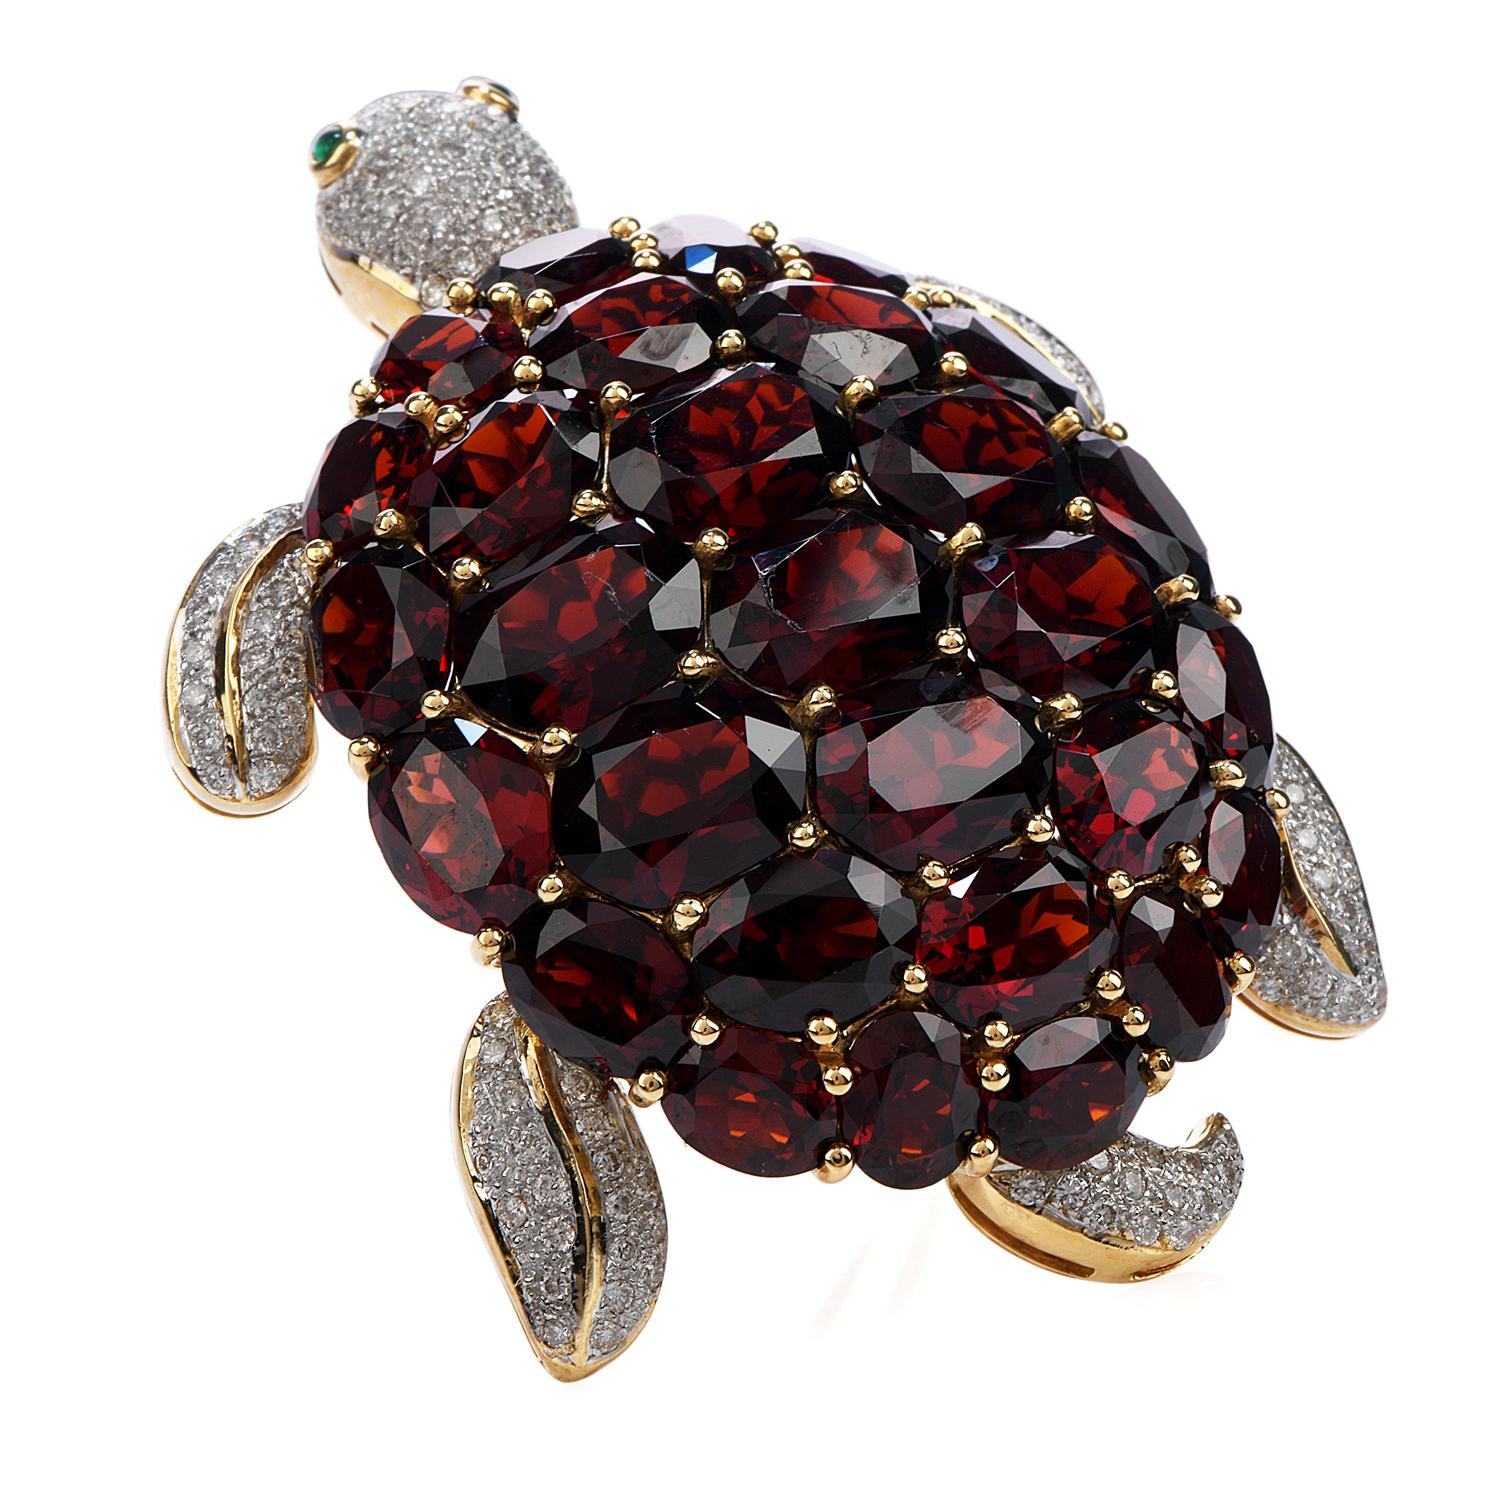 This stunning Well-Made Estate Turtle Motif Brooch Pin

is crafted in solid 18K White & Yellow Gold.

The head, paws and tail of the turtle, are finely encrusted with elaborated with Cluster Style Diamonds of approx. 2.54 carats, H-I color, VS,